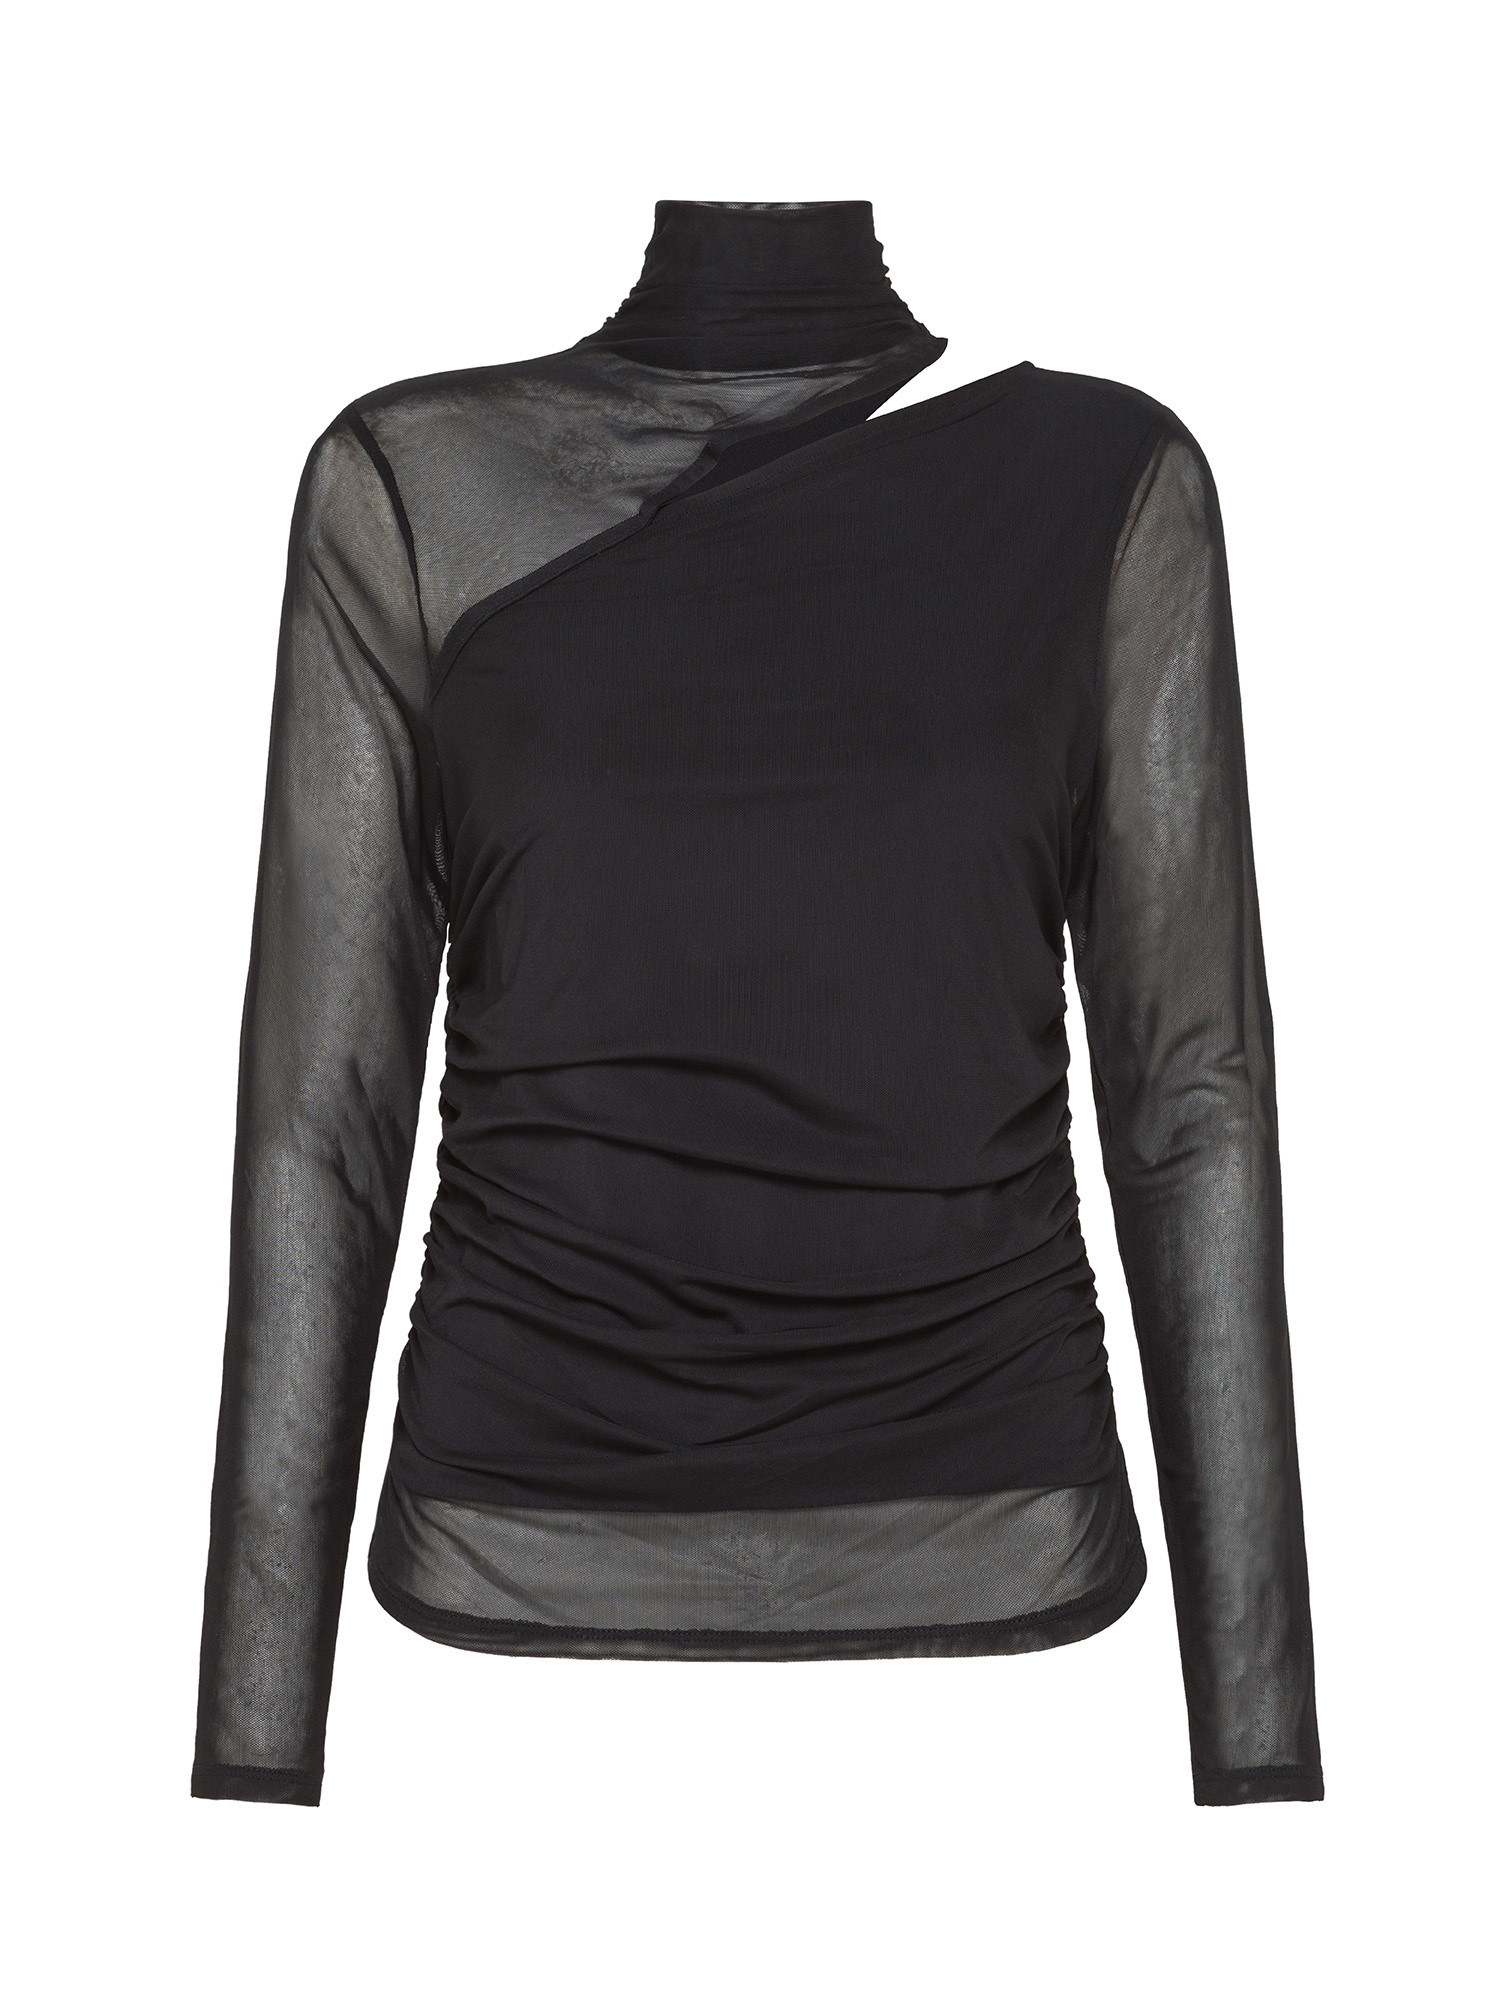 DKNY - Mesh sweater with cut out detail, Black, large image number 0